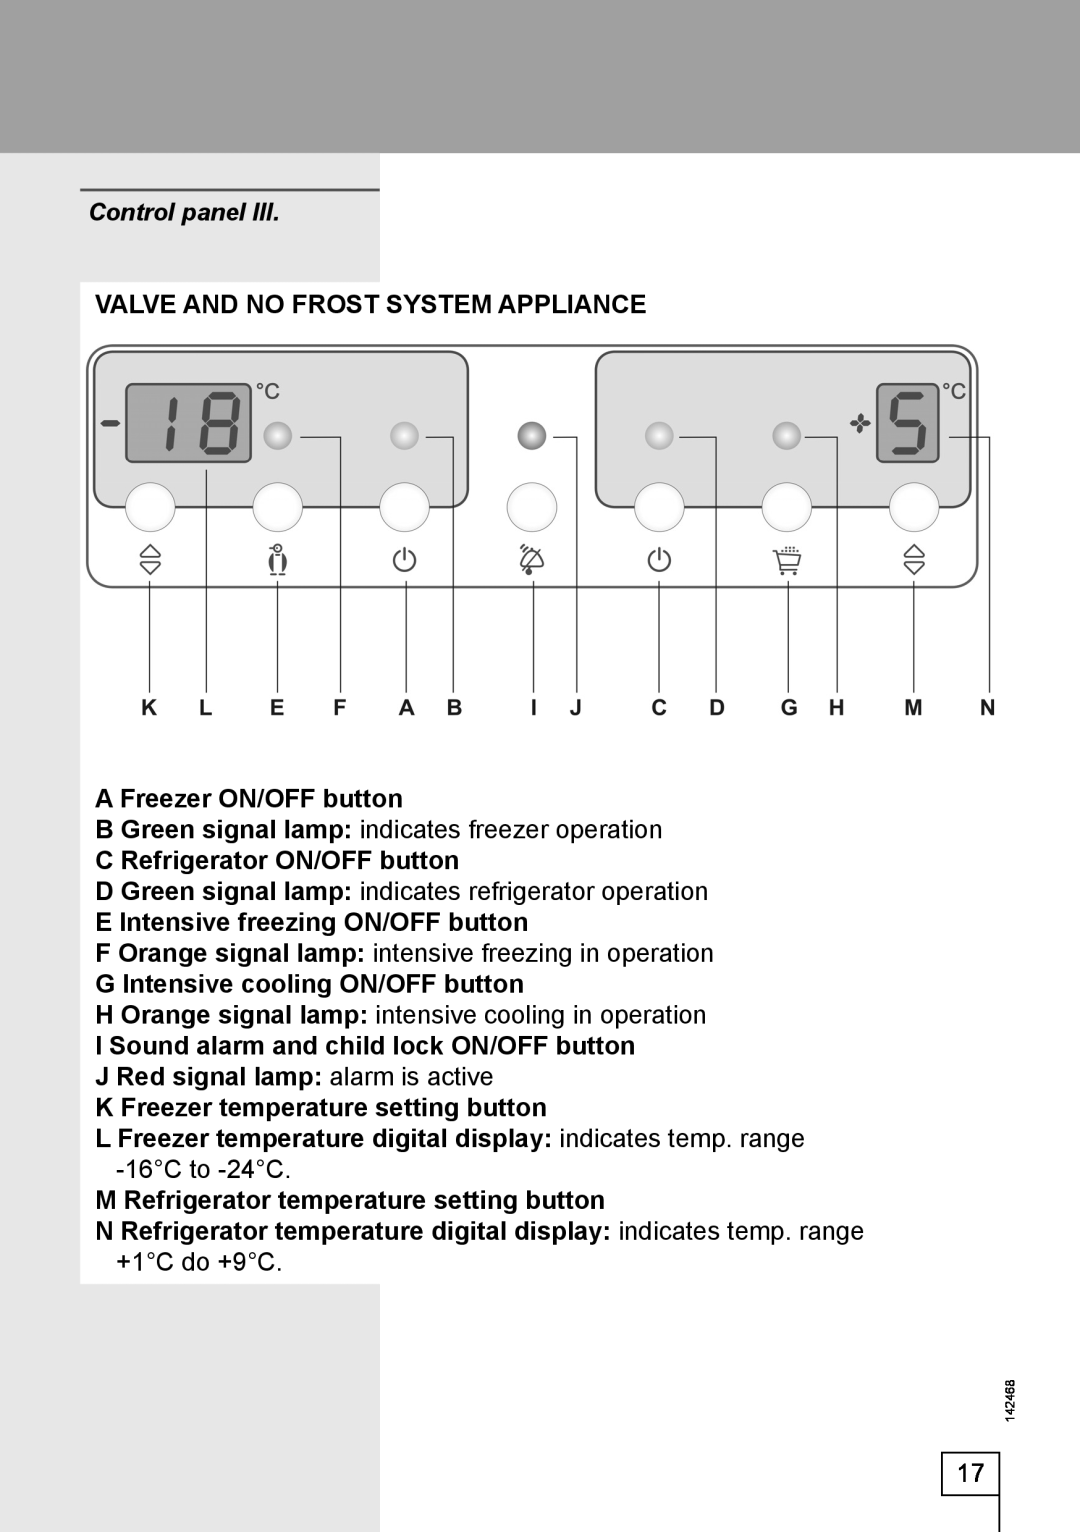 Smeg 142468 manual VALVE AND NO FROST SYSTEM APPLIANCE A Freezer ON/OFF button, C Refrigerator ON/OFF button 